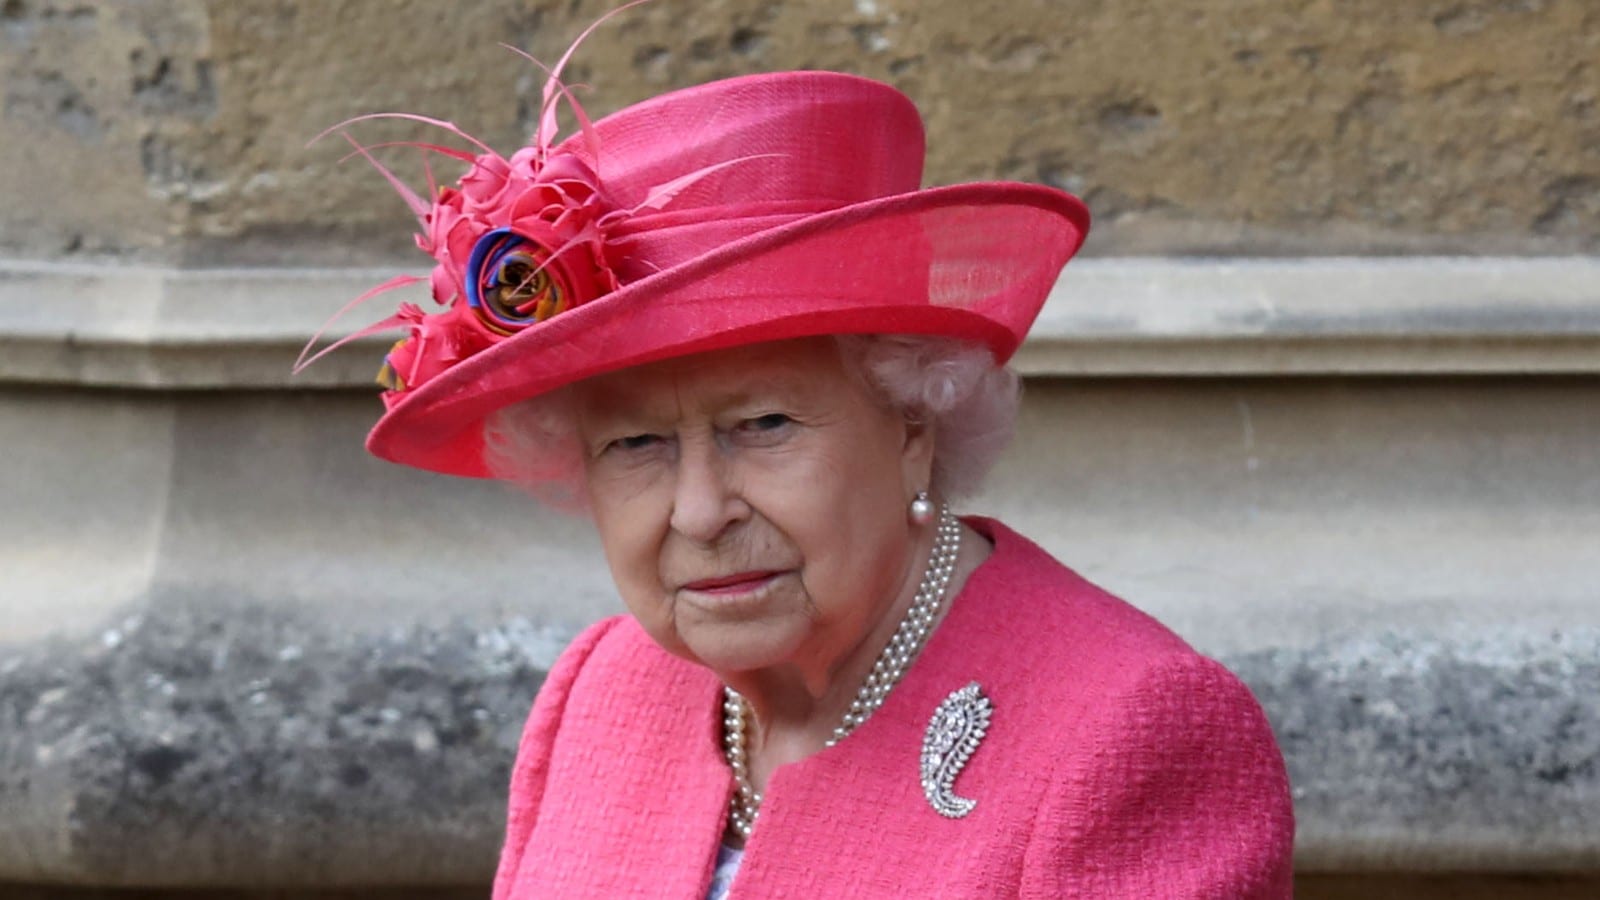 Queen Elizabeth will feel 'sadness' as Barbados removes her as head of state: report